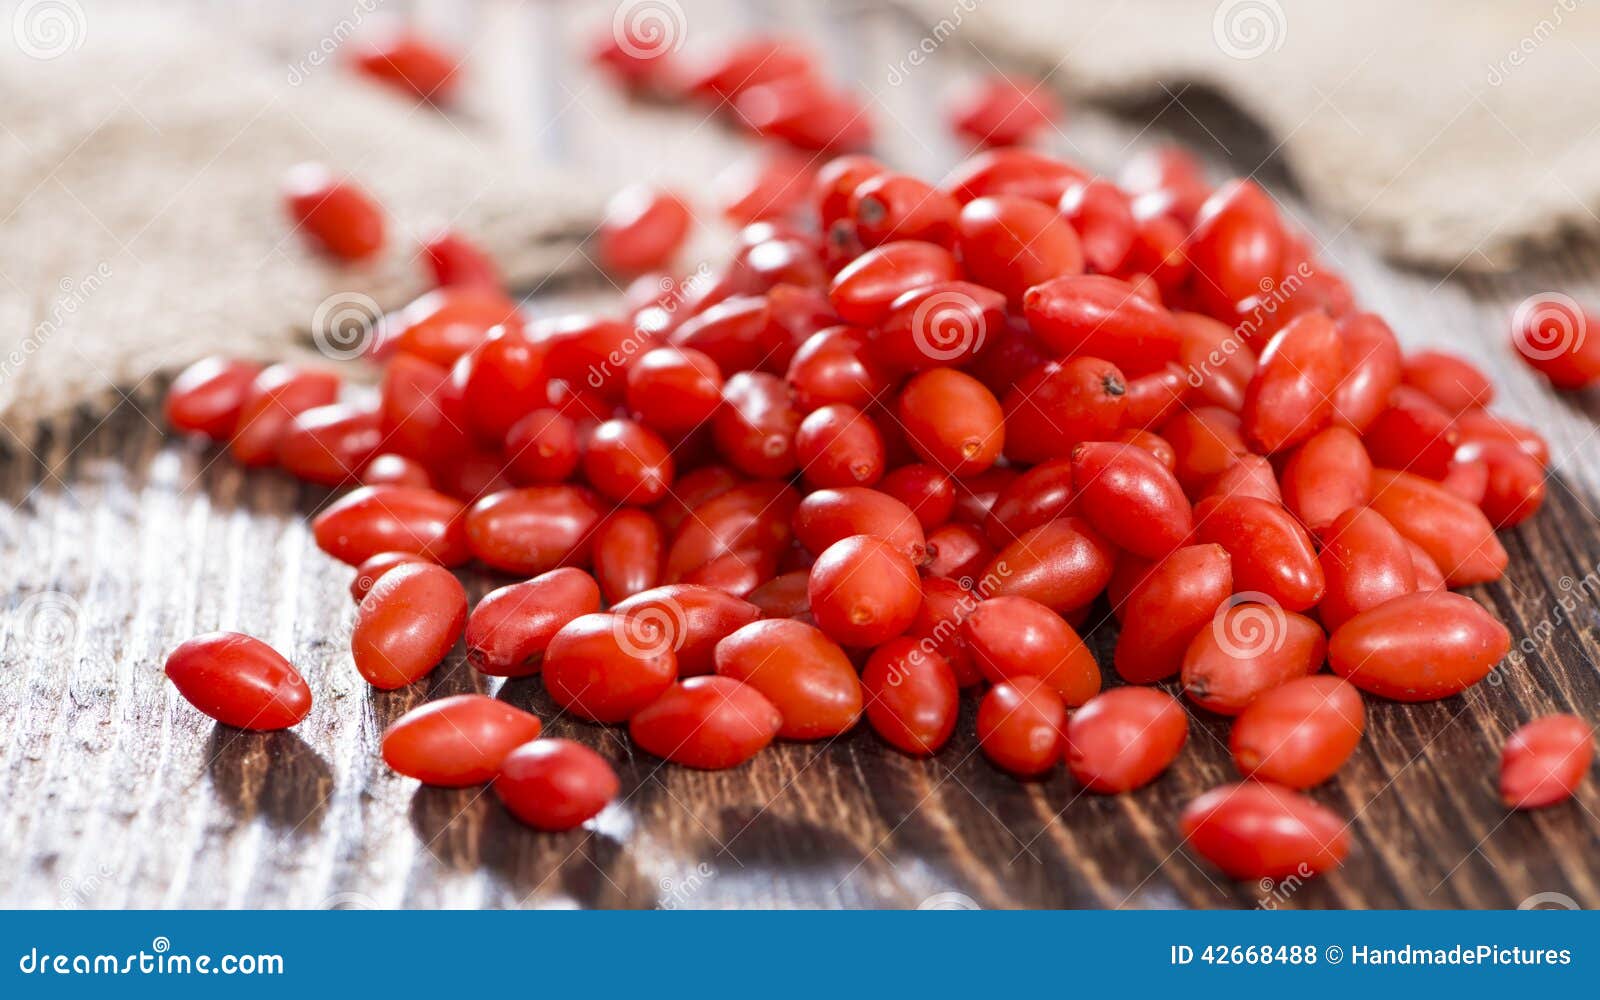 “Discover the Superfood Power of Goji Berries: Packed with Antioxidants and Nutrients!”